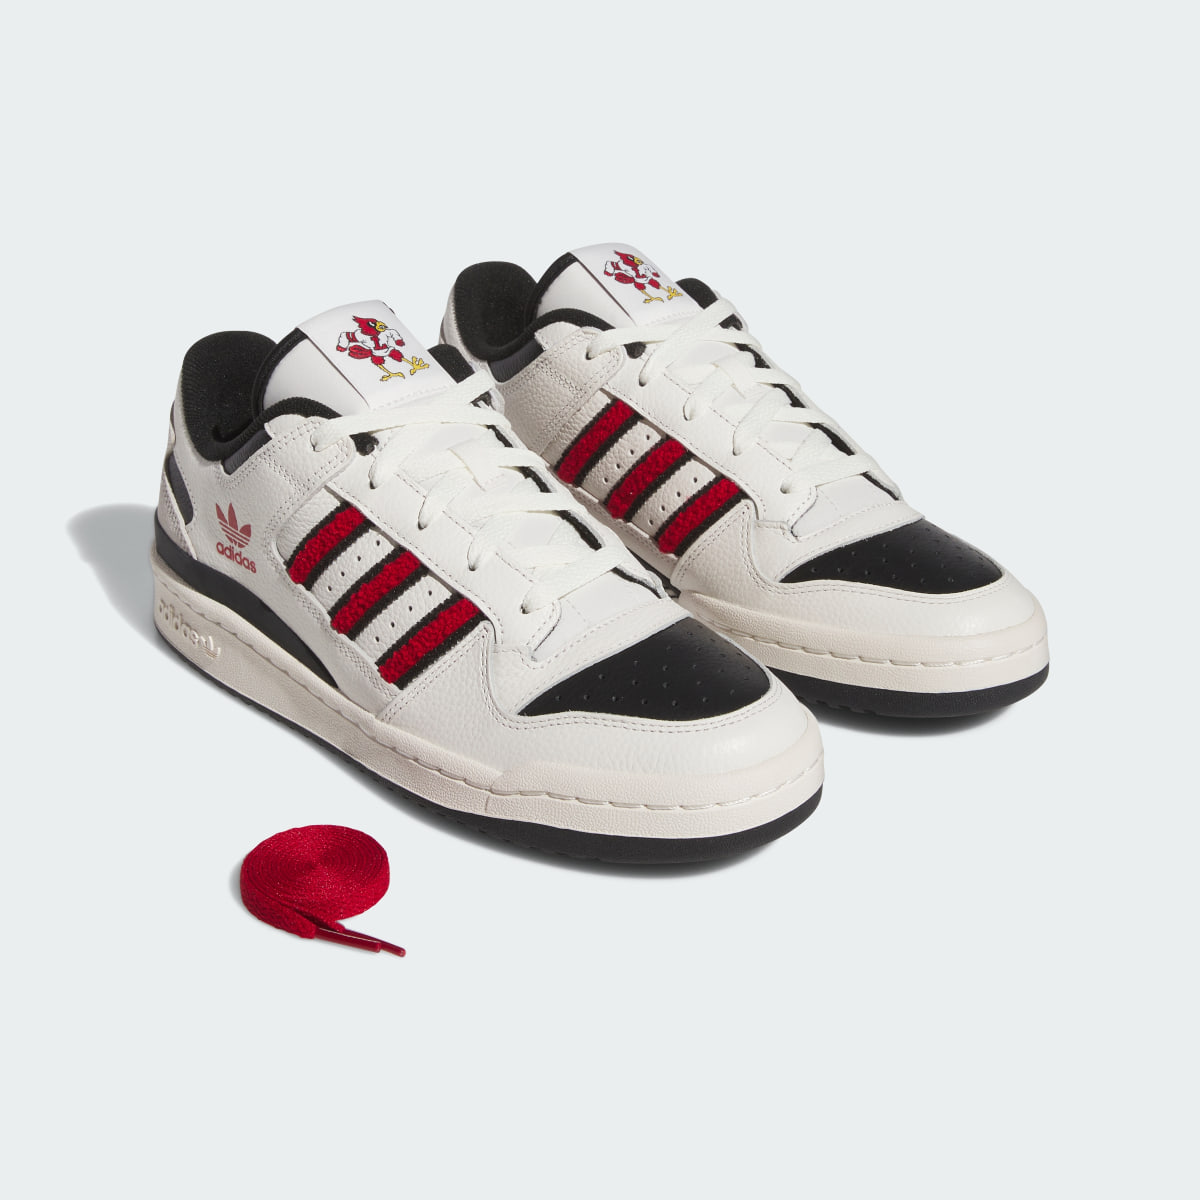 Adidas Louisville Forum Low Shoes. 8